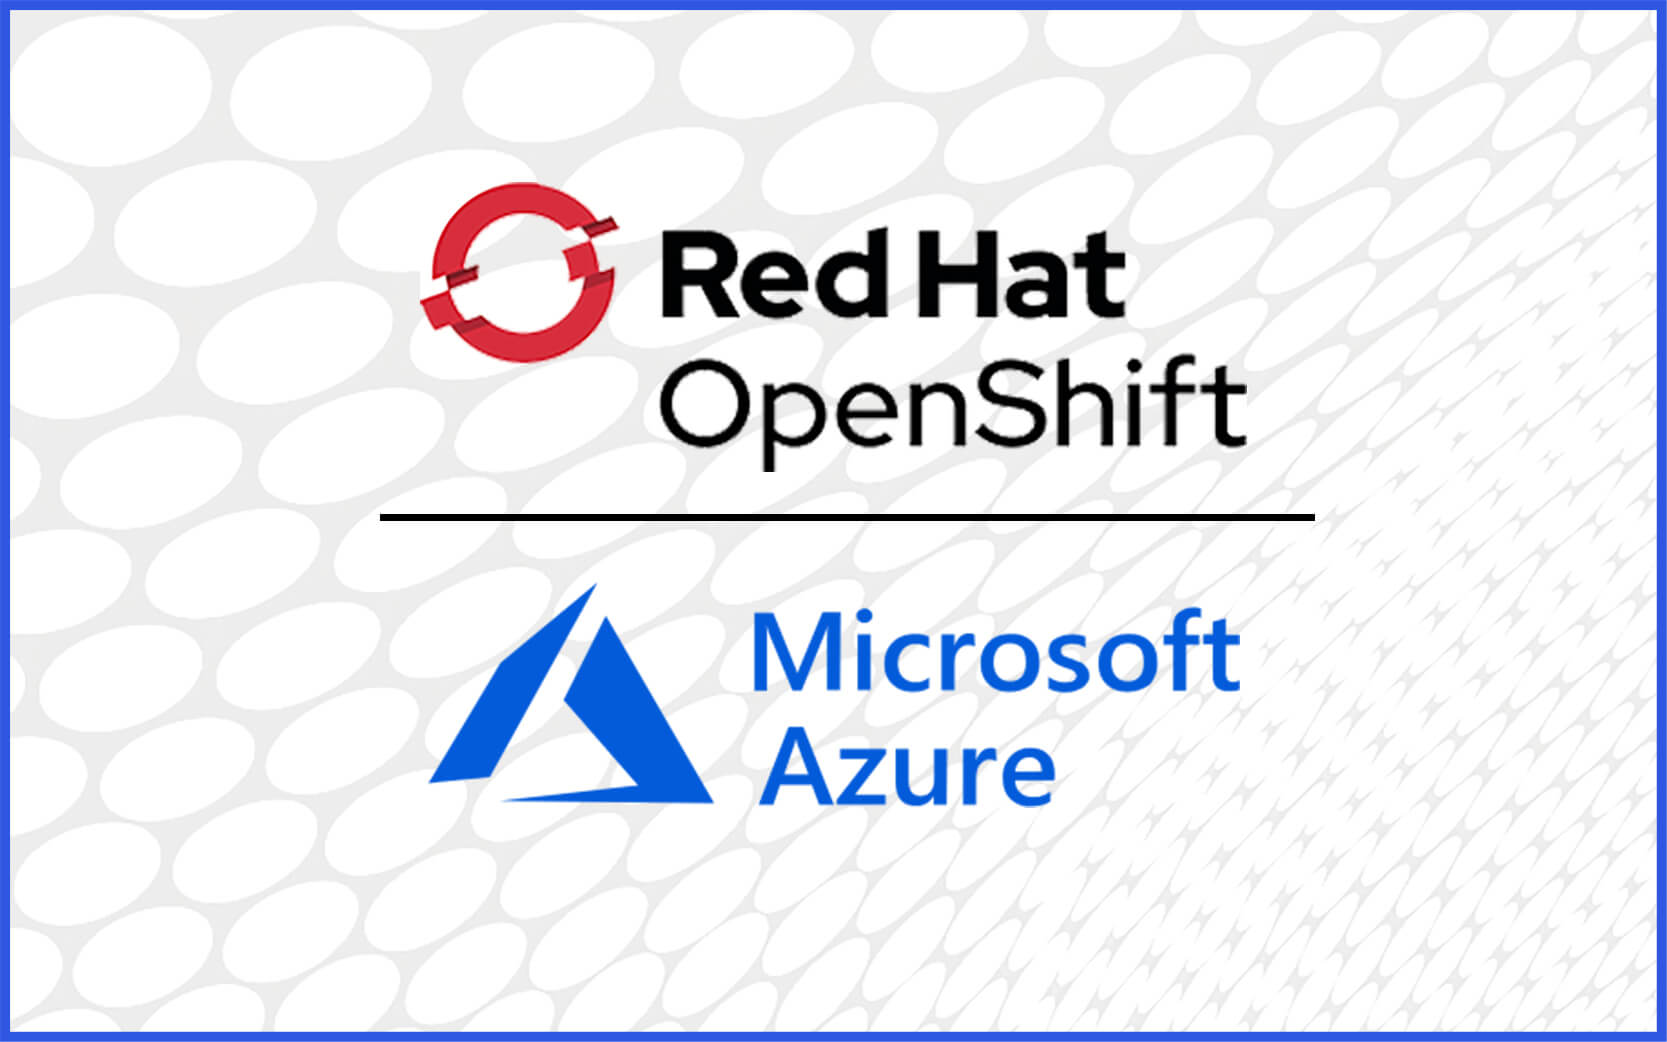 Red Hat OpenShift on Azure